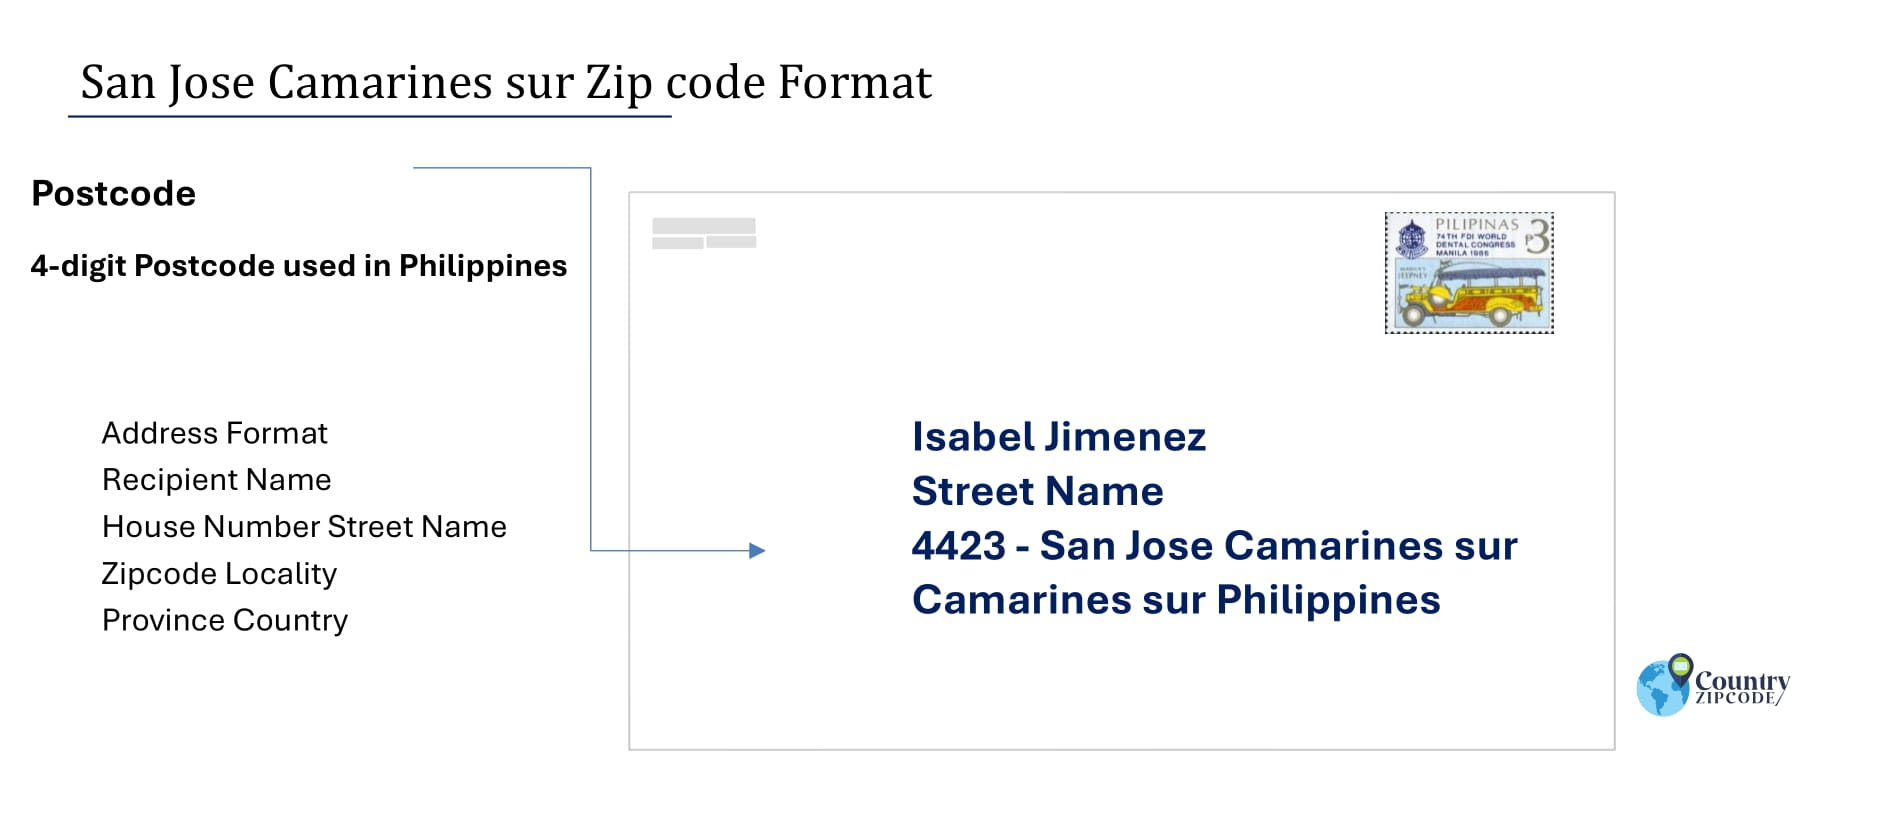 example of San Jose Camarines sur Philippines zip code and address format